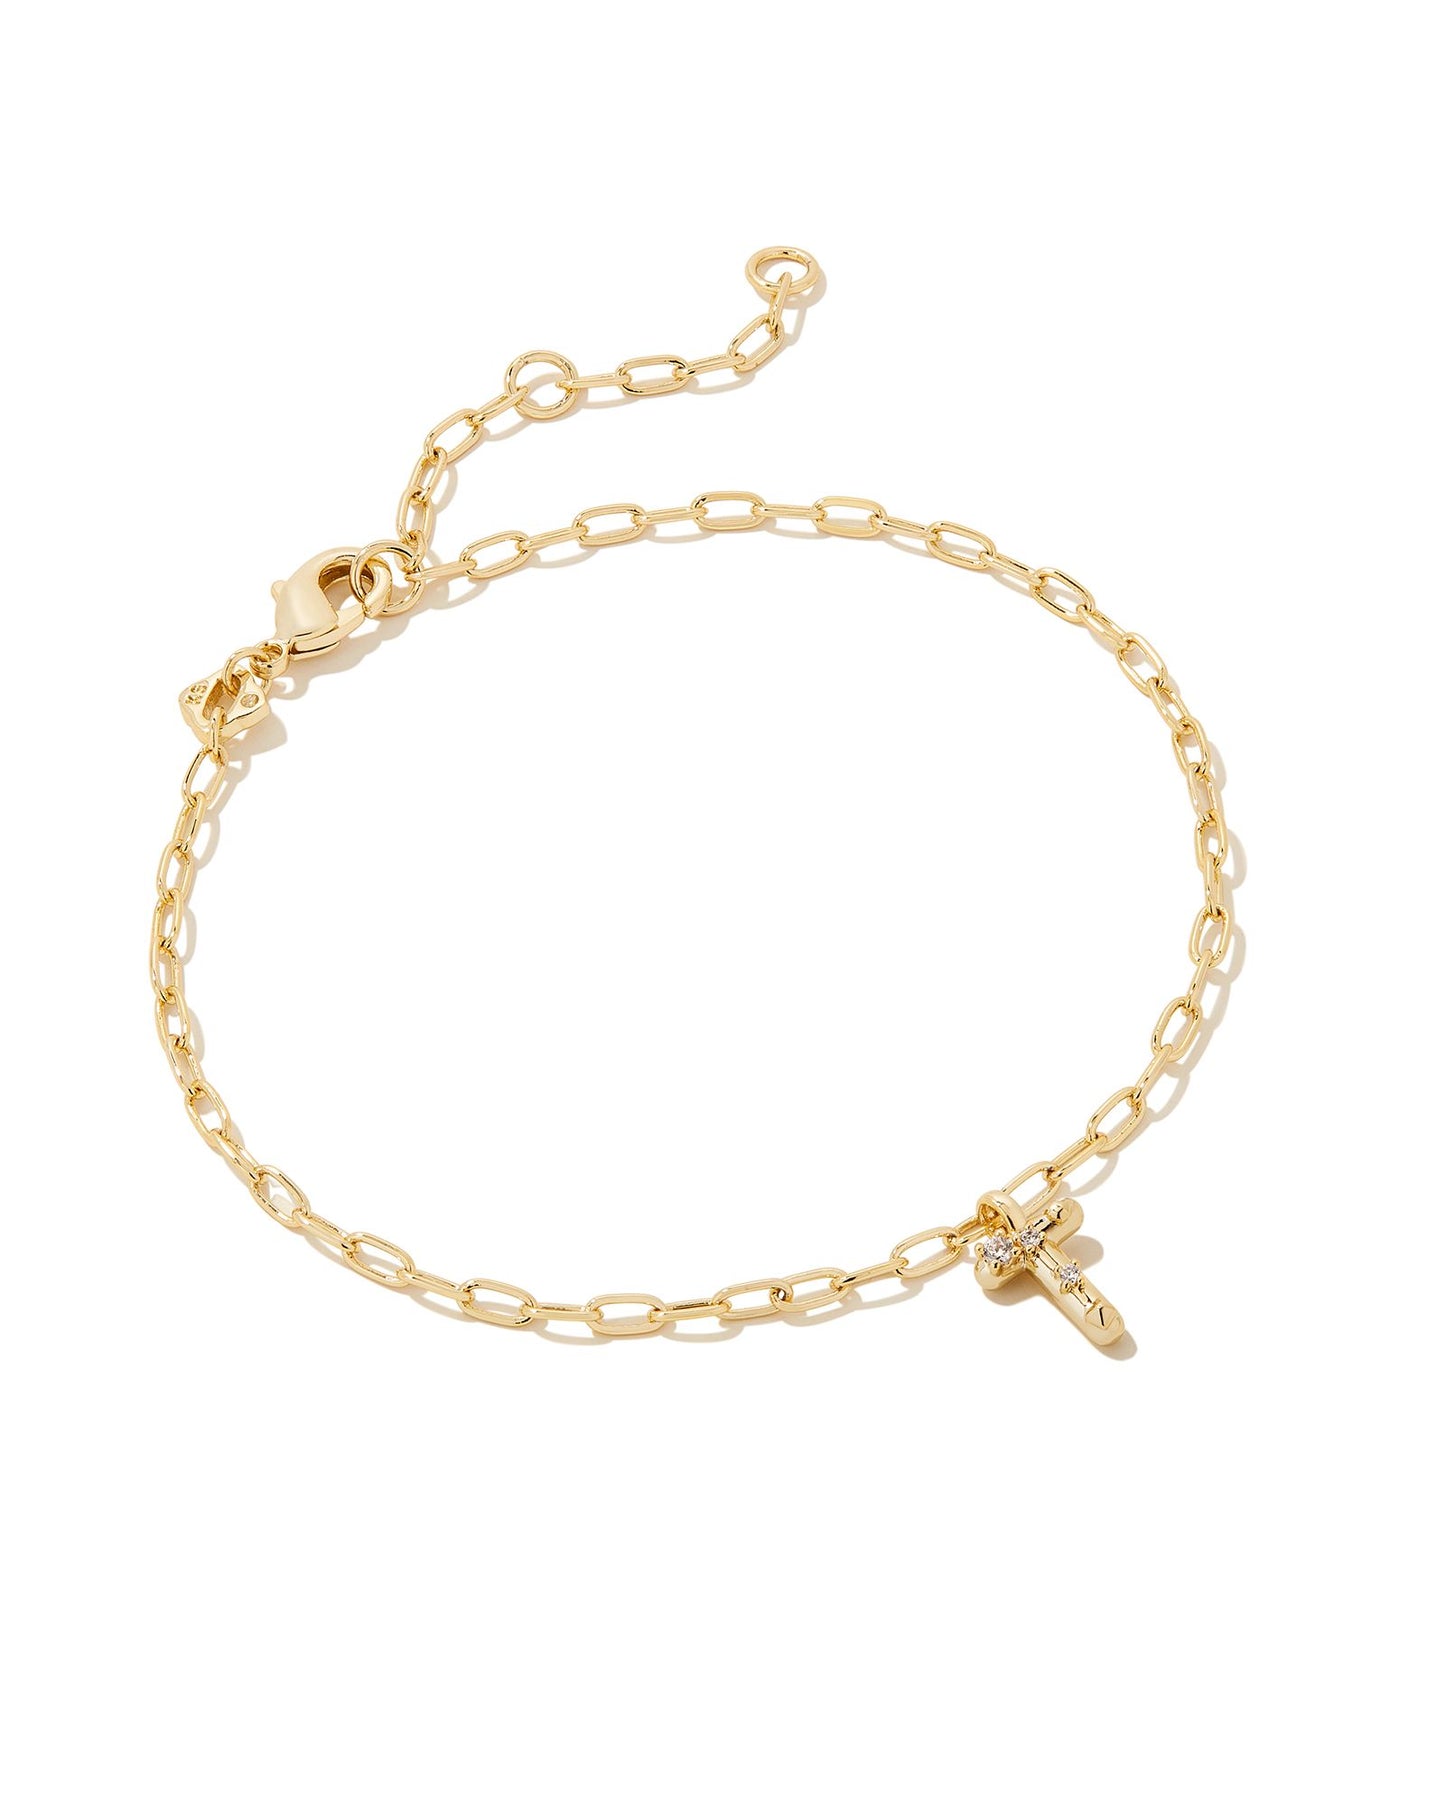 Add a personal touch to your wrist stack with the Crystal Delicate Chain Bracelet in White Crystal, our first Fashion Jewelry initial bracelet. Featuring a dainty chain and letter charm with a hint of sparkle, this bracelet is the perfect way to celebrate the ones you love—including yourself!  Dimensions- 6.5' CHAIN WITH 1.5' EXTENDER, 0.45'L X 0.26"W PENDANT Metal- 14K Gold plated over brass Closure- Lobster Clasp Material-  White CZ Letter T